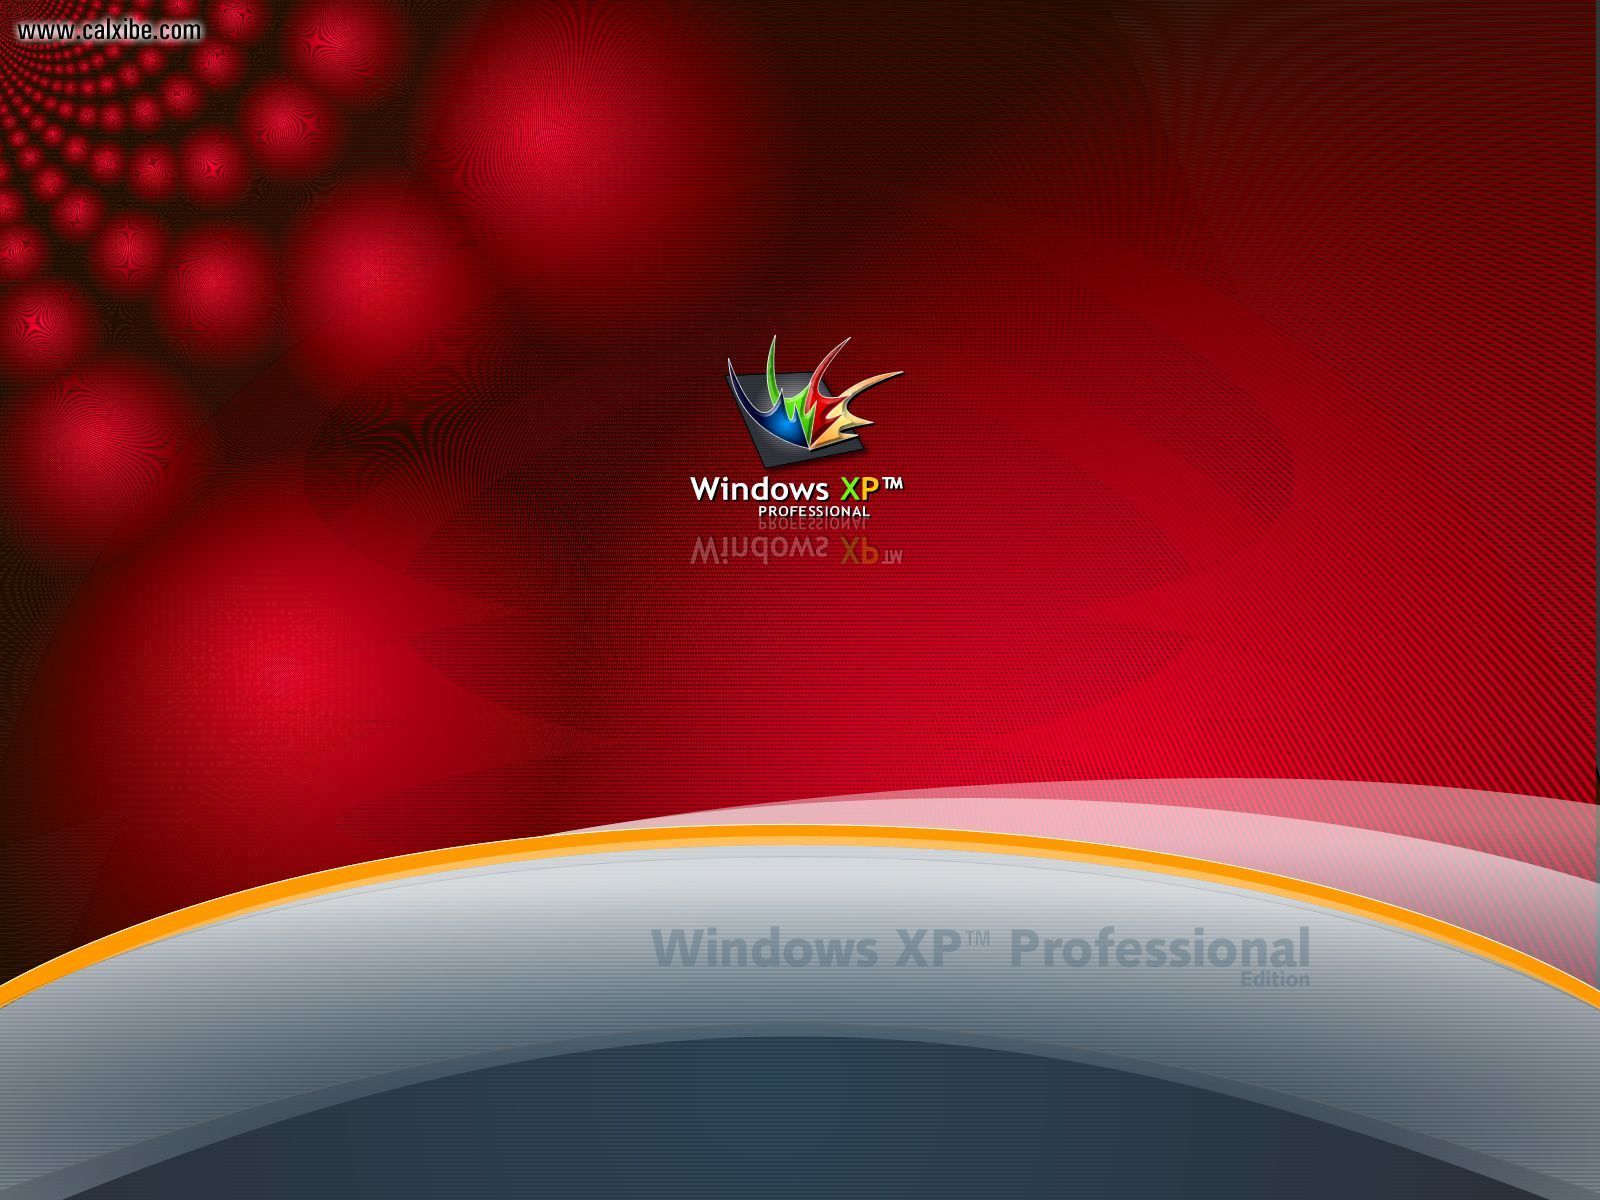 Windows xp professional wallpapers